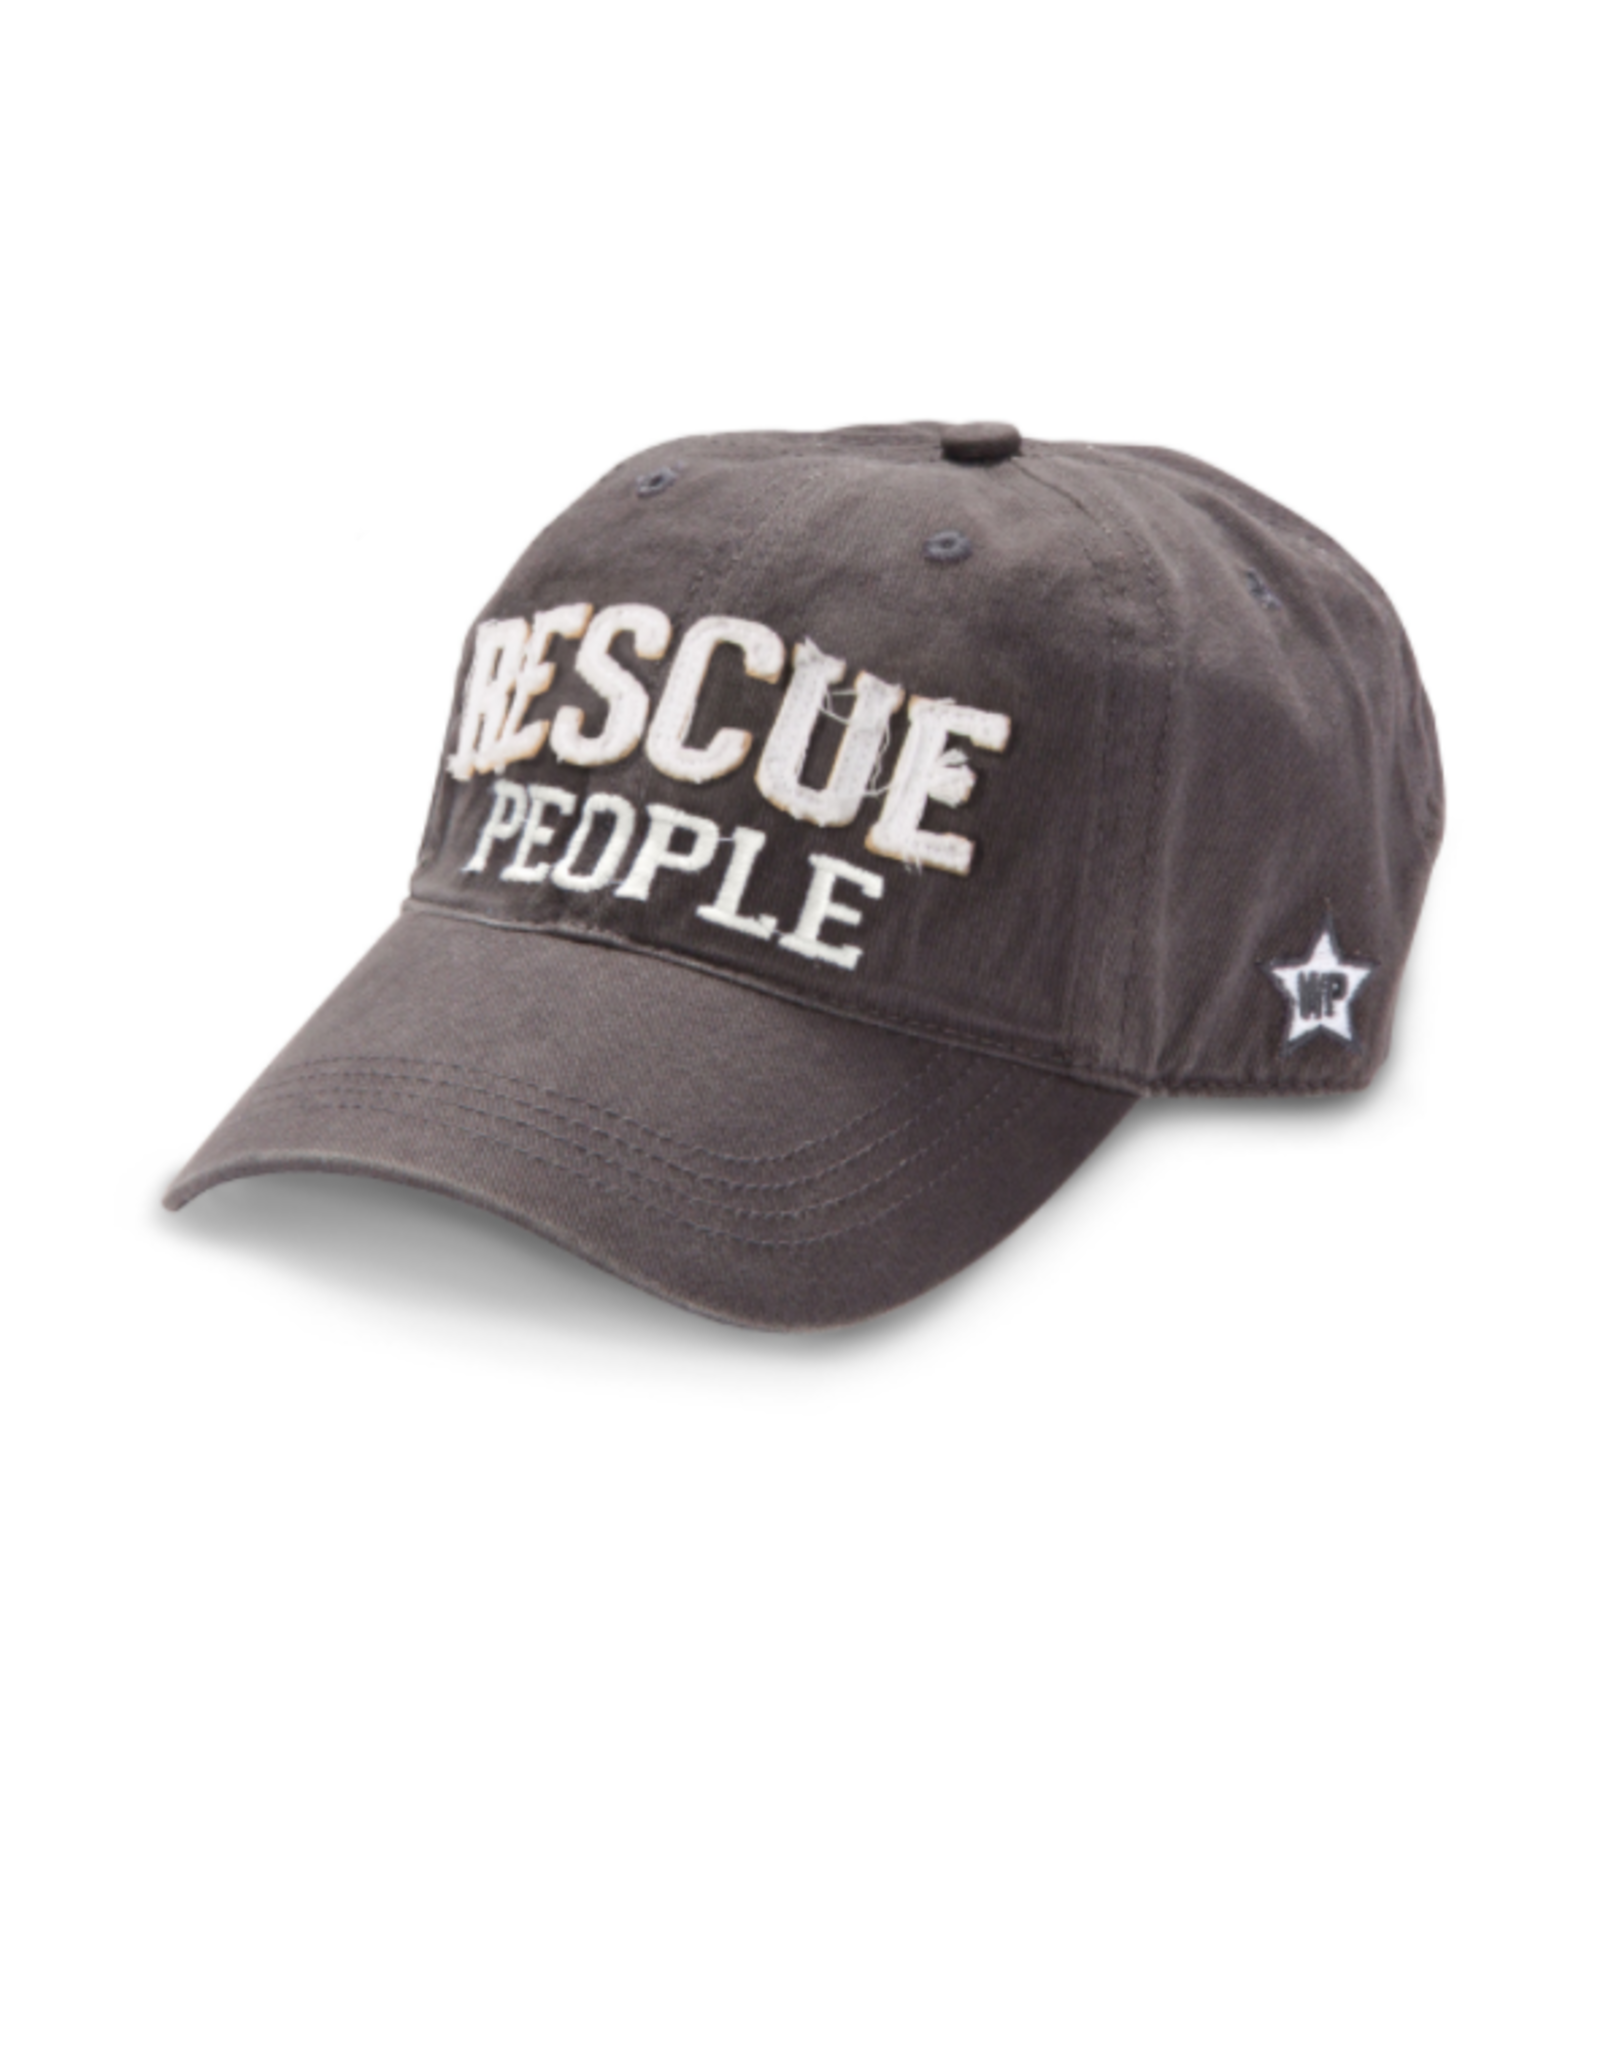 We People Rescue People Ball Hat, grey